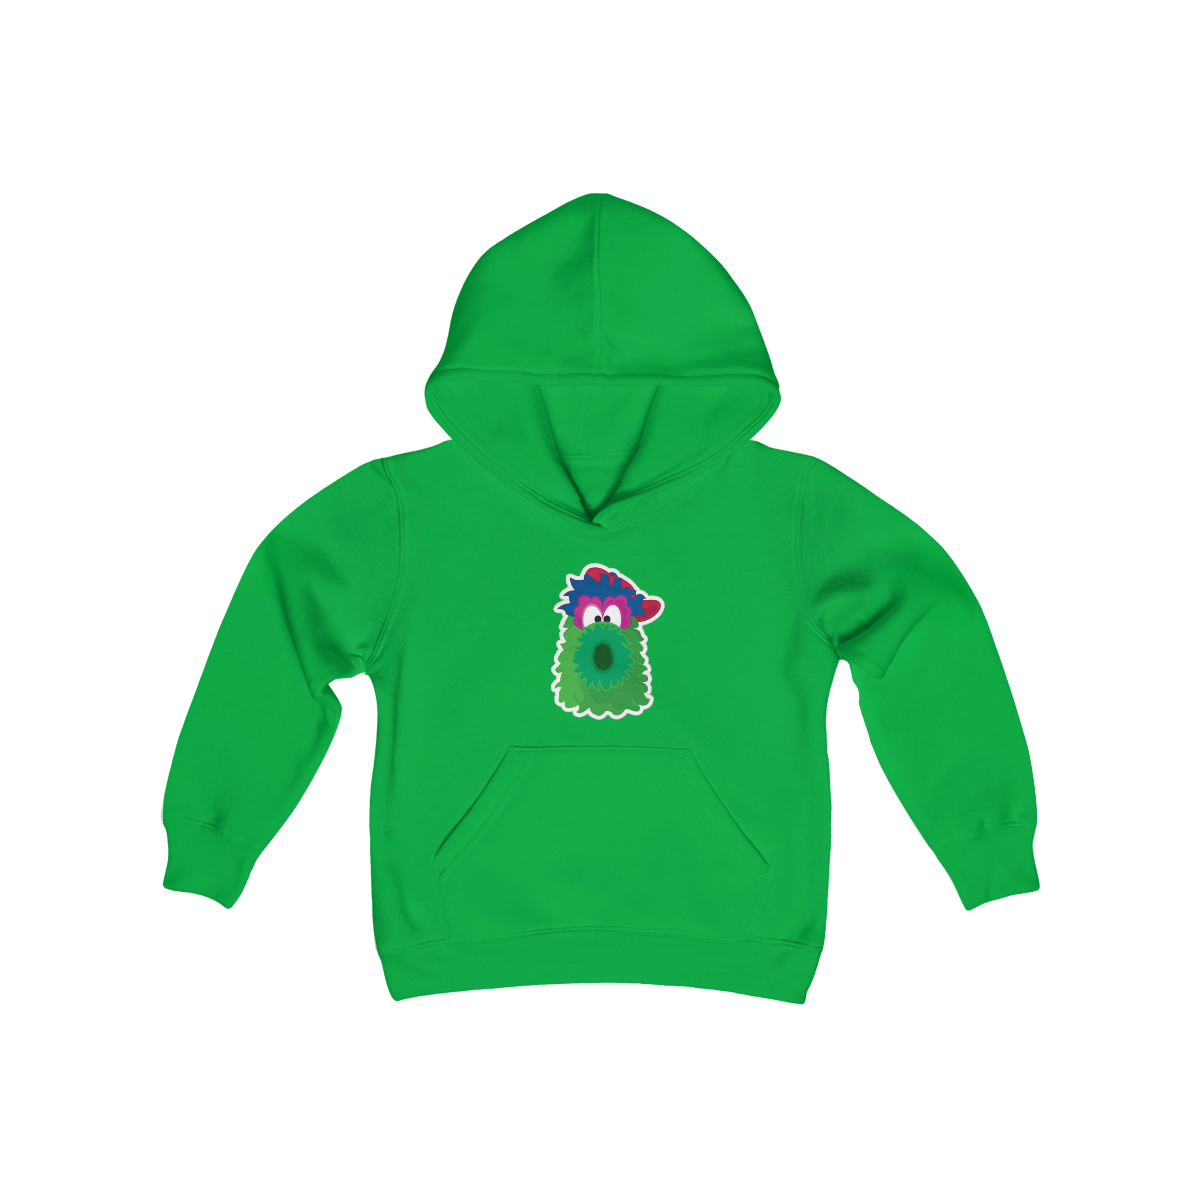 Philly Phanatic Kids Shirt - Section 419